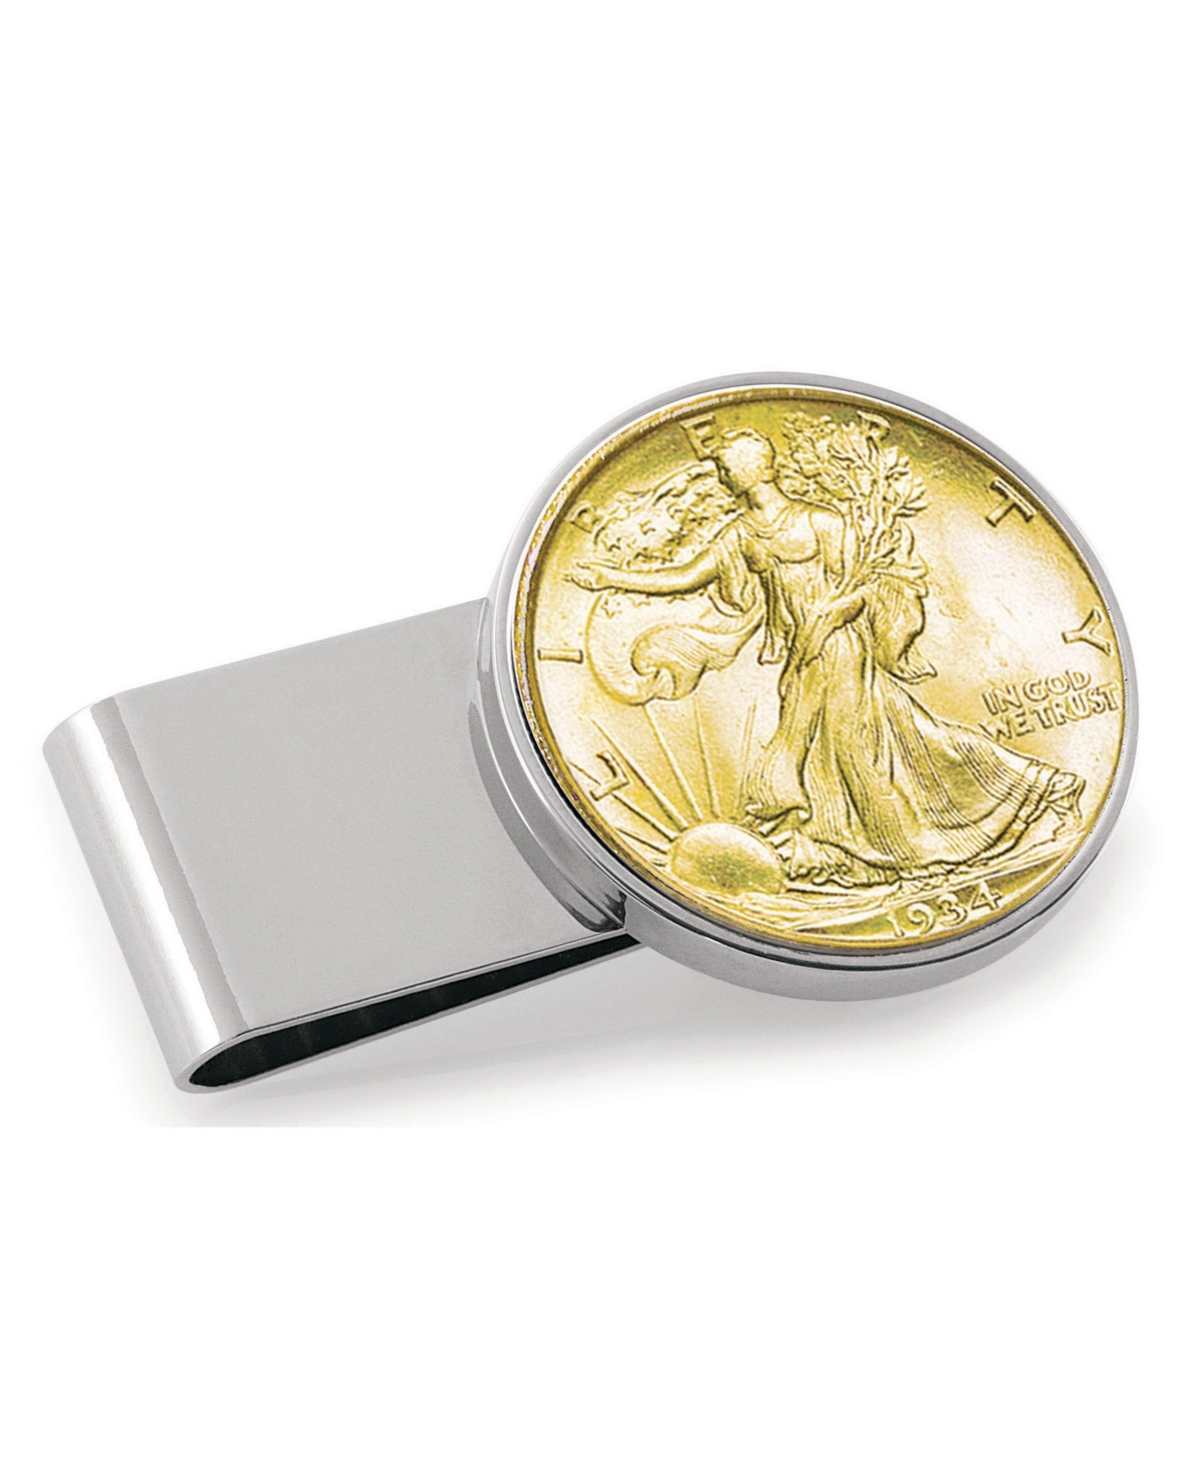 Men's American Coin Treasures Gold-Layered Silver Walking Liberty Half Dollar Stainless Steel Coin Money Clip - Silver